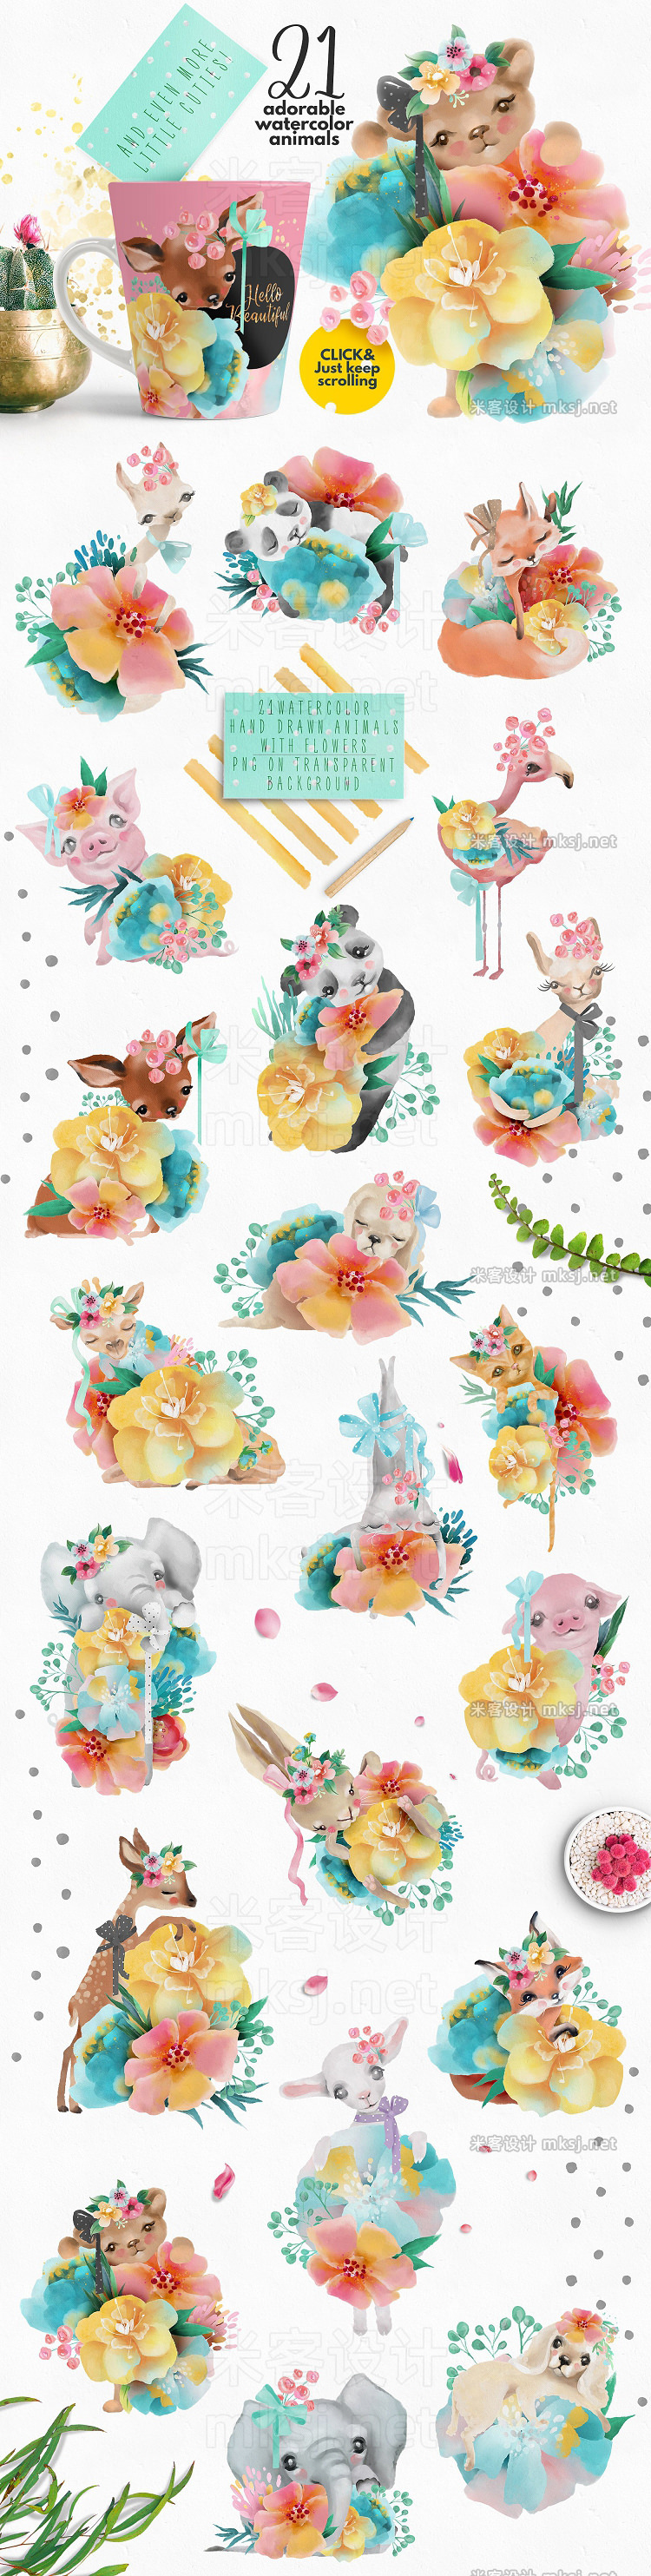 png素材 Pretty Letters - Baby Designers Kit